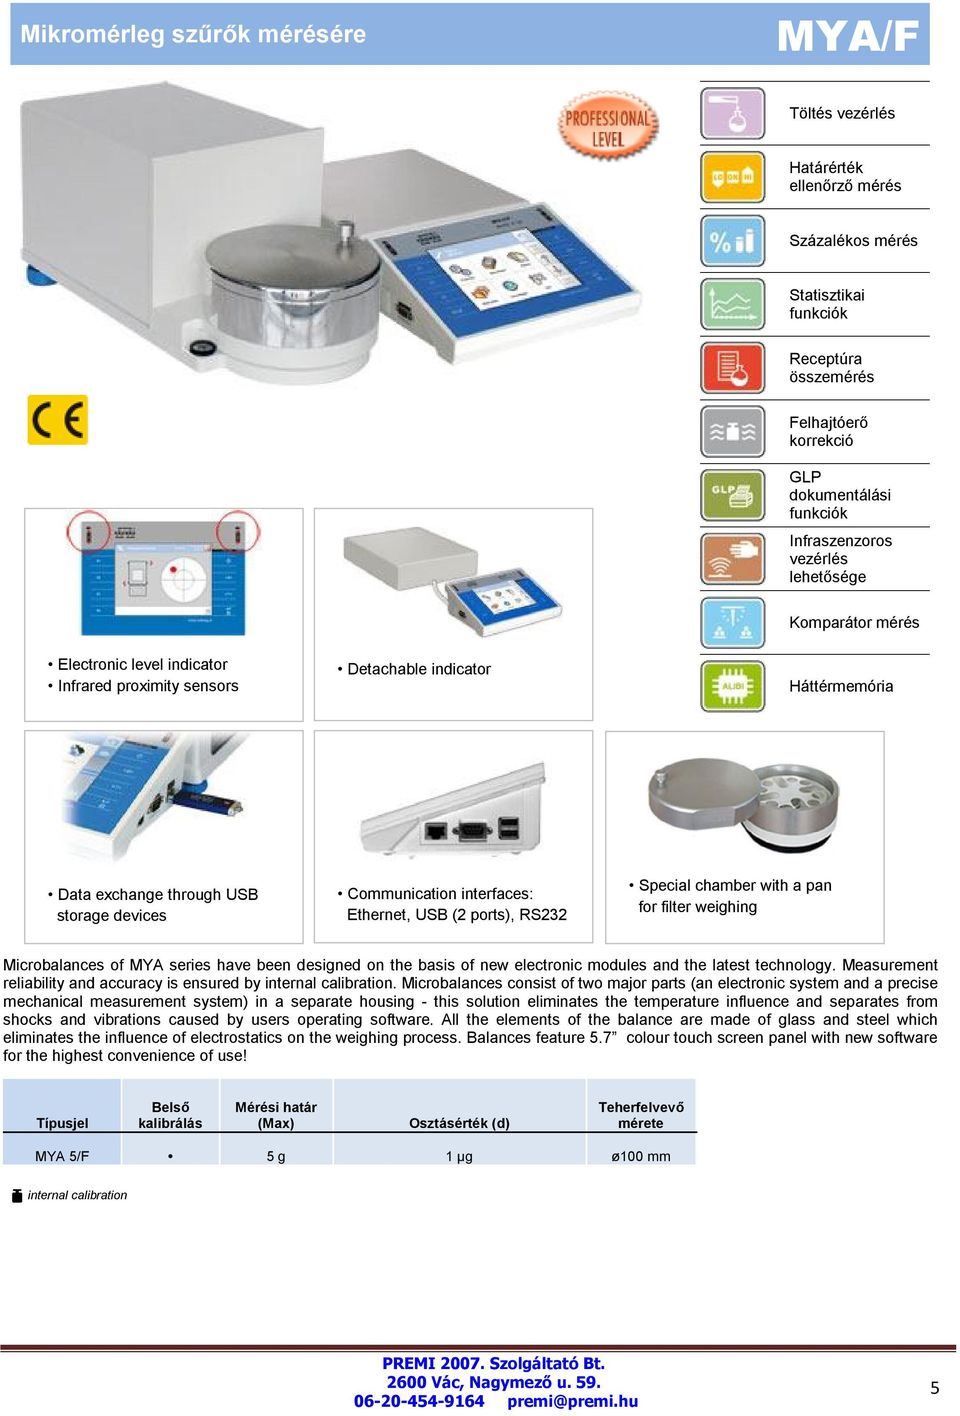 Microbalances of MYA series have been designed on the basis of new electronic modules and the latest technology. Measurement reliability and accuracy is ensured by.